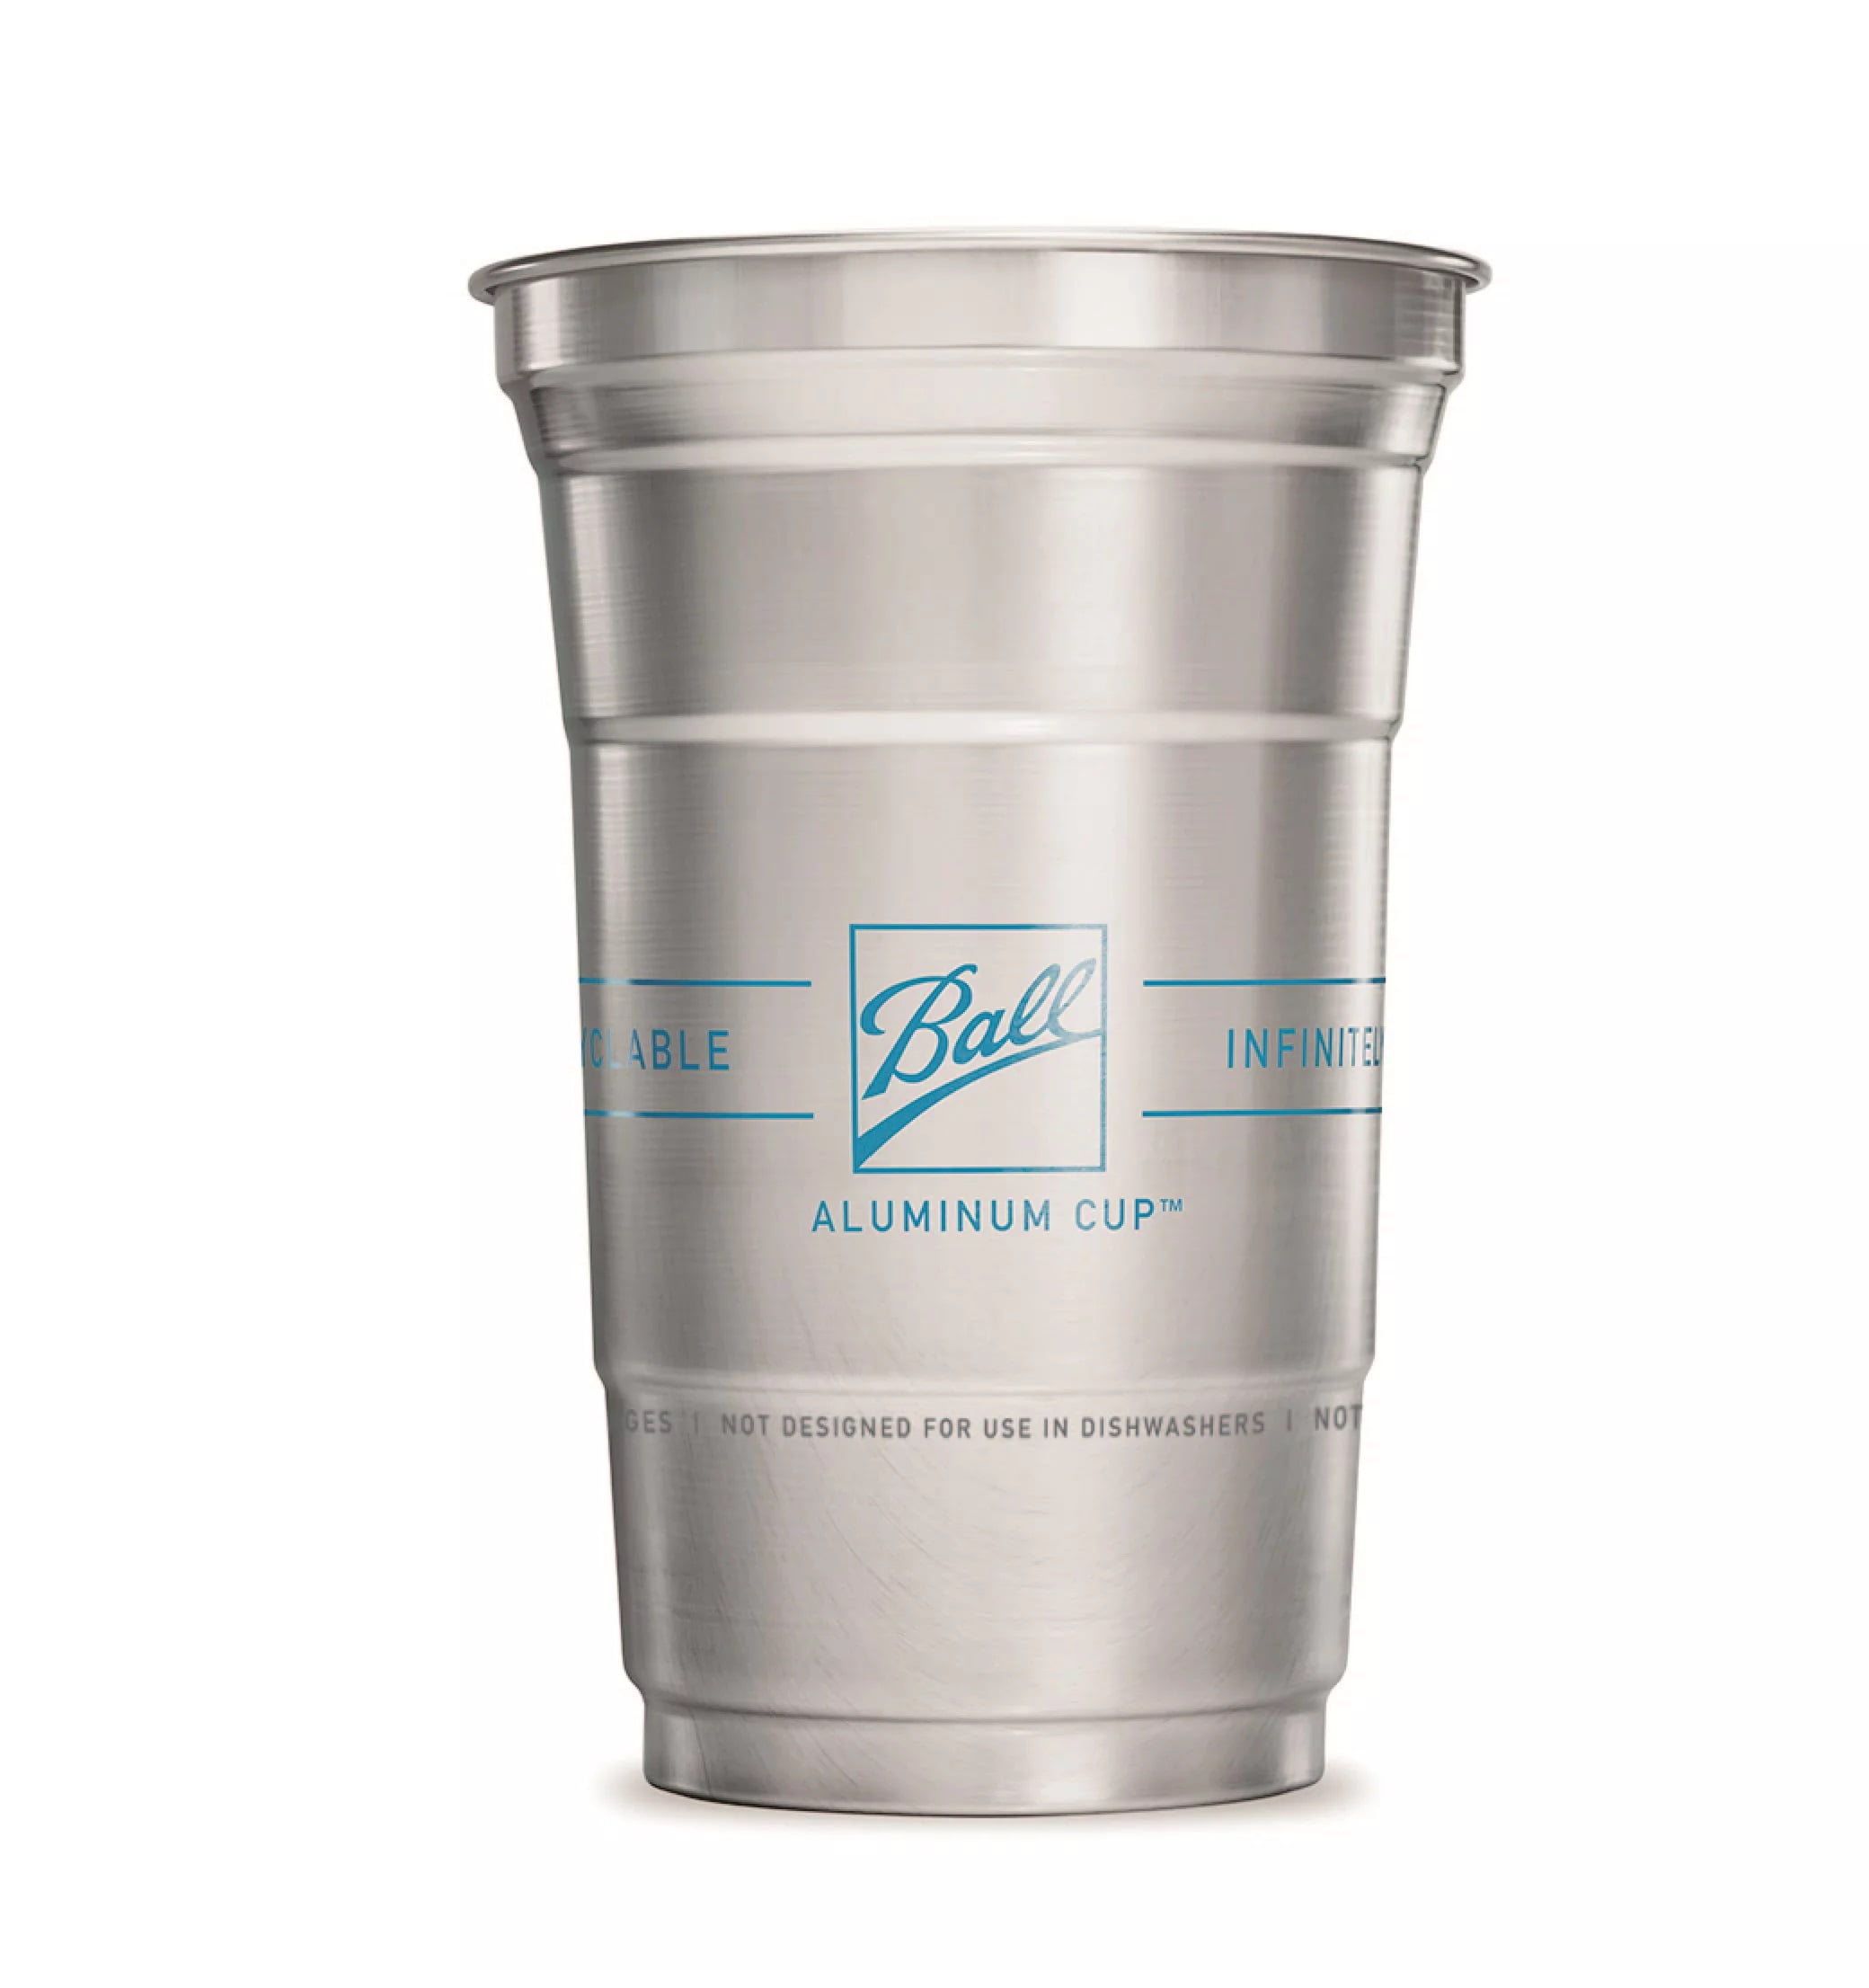 Zelbeez Chill Aluminum Cups, Dishwasher Safe, 16 oz. Orange and White 100%  Recyclable, Reusable and …See more Zelbeez Chill Aluminum Cups, Dishwasher